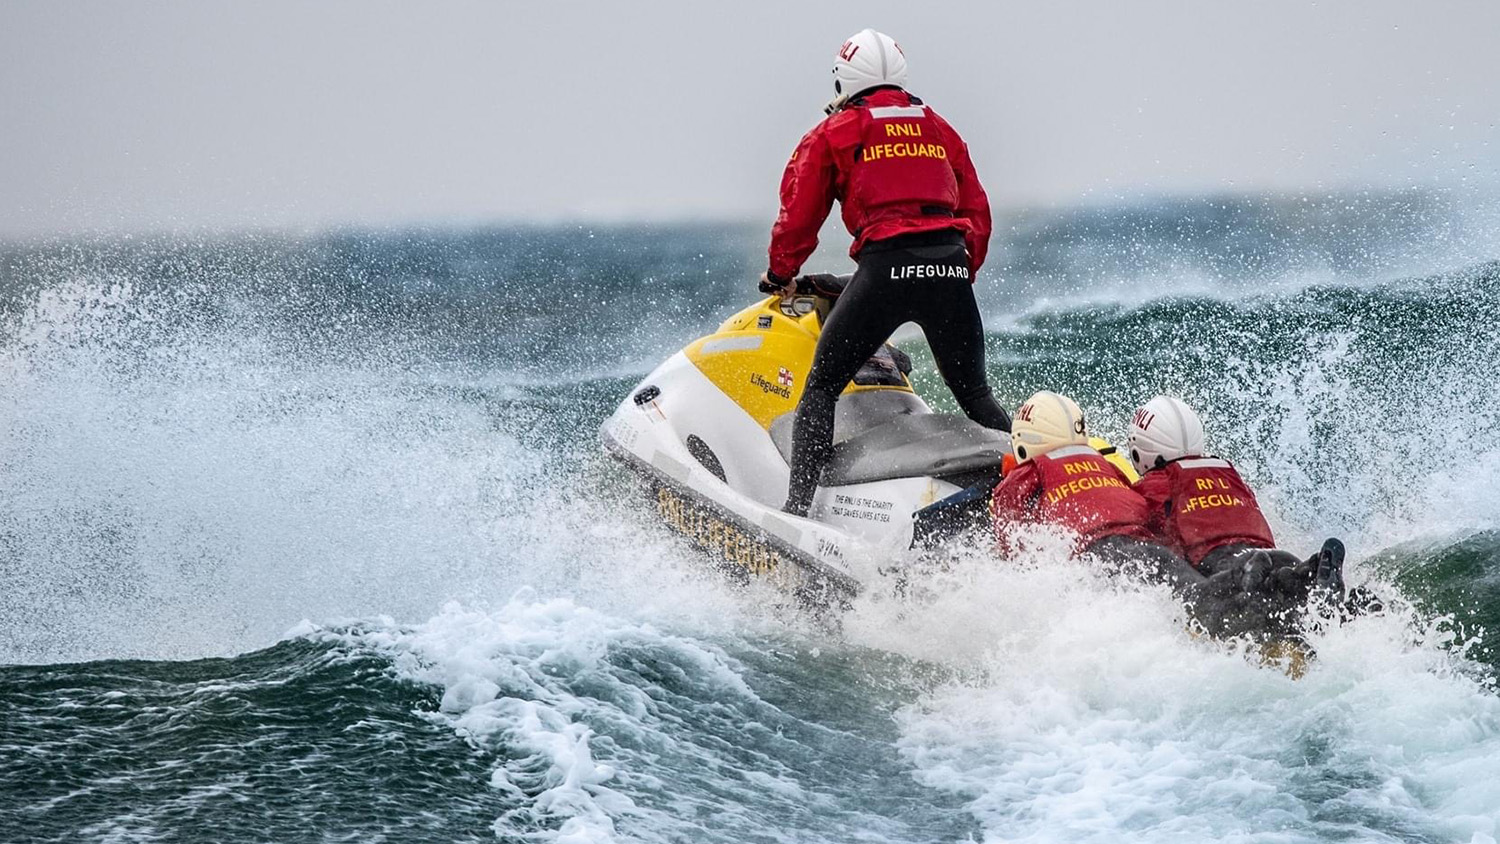 Requirements and training – RNLI lifeguards